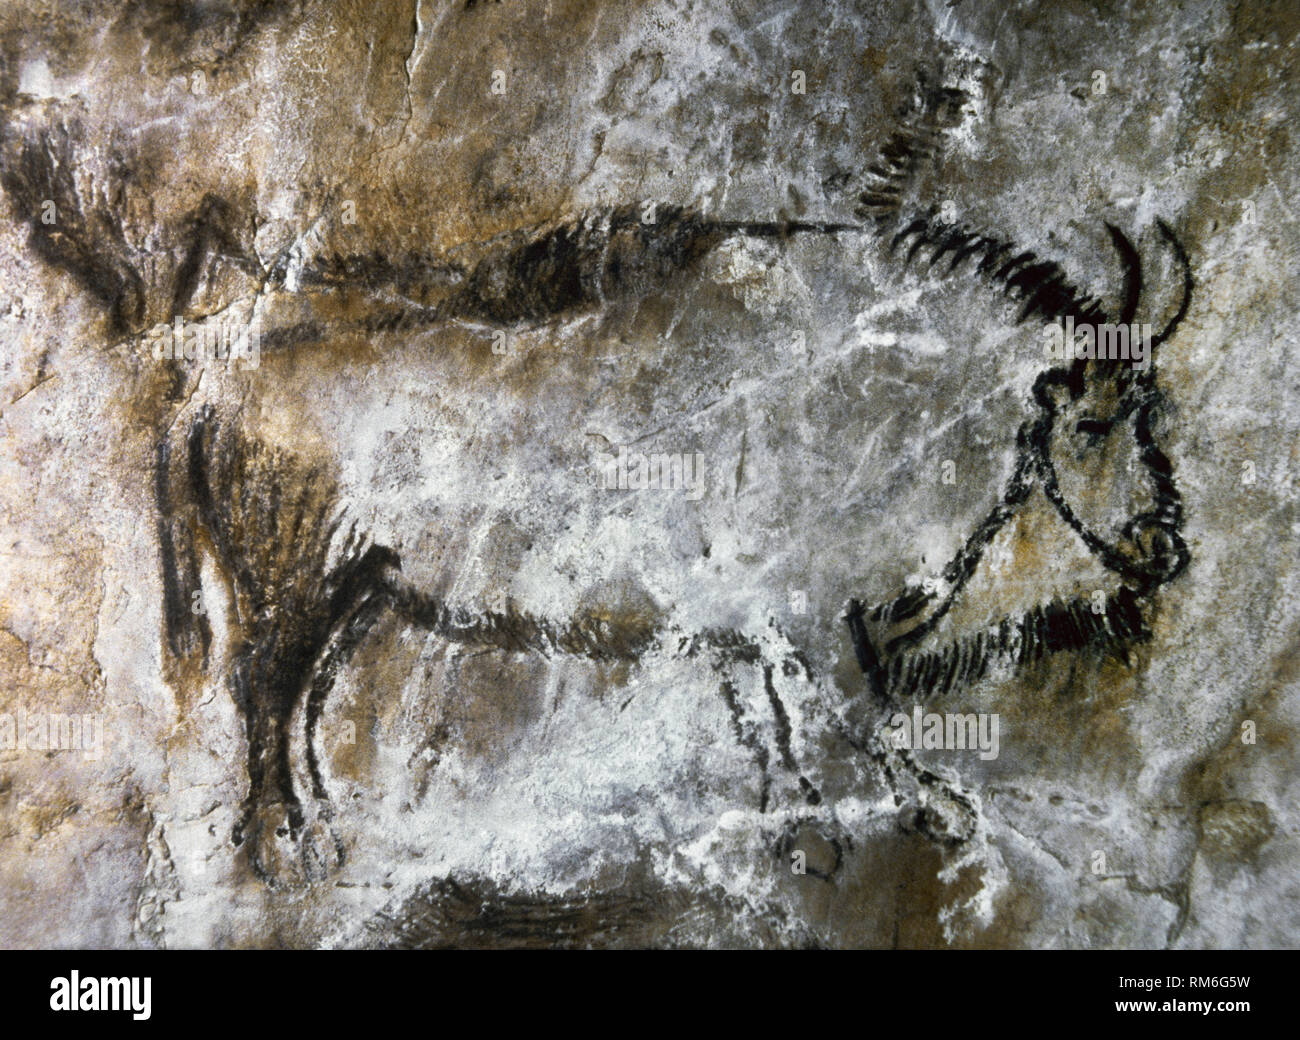 Cave of Niaux. Black Hall panel. Painting of the Bison, executed in a Black-outlined style. Late Upper Paleolithic. Magdalenian Culture, c. 13.000 BCE. Ariege, southwestern France. Europe. Stock Photo